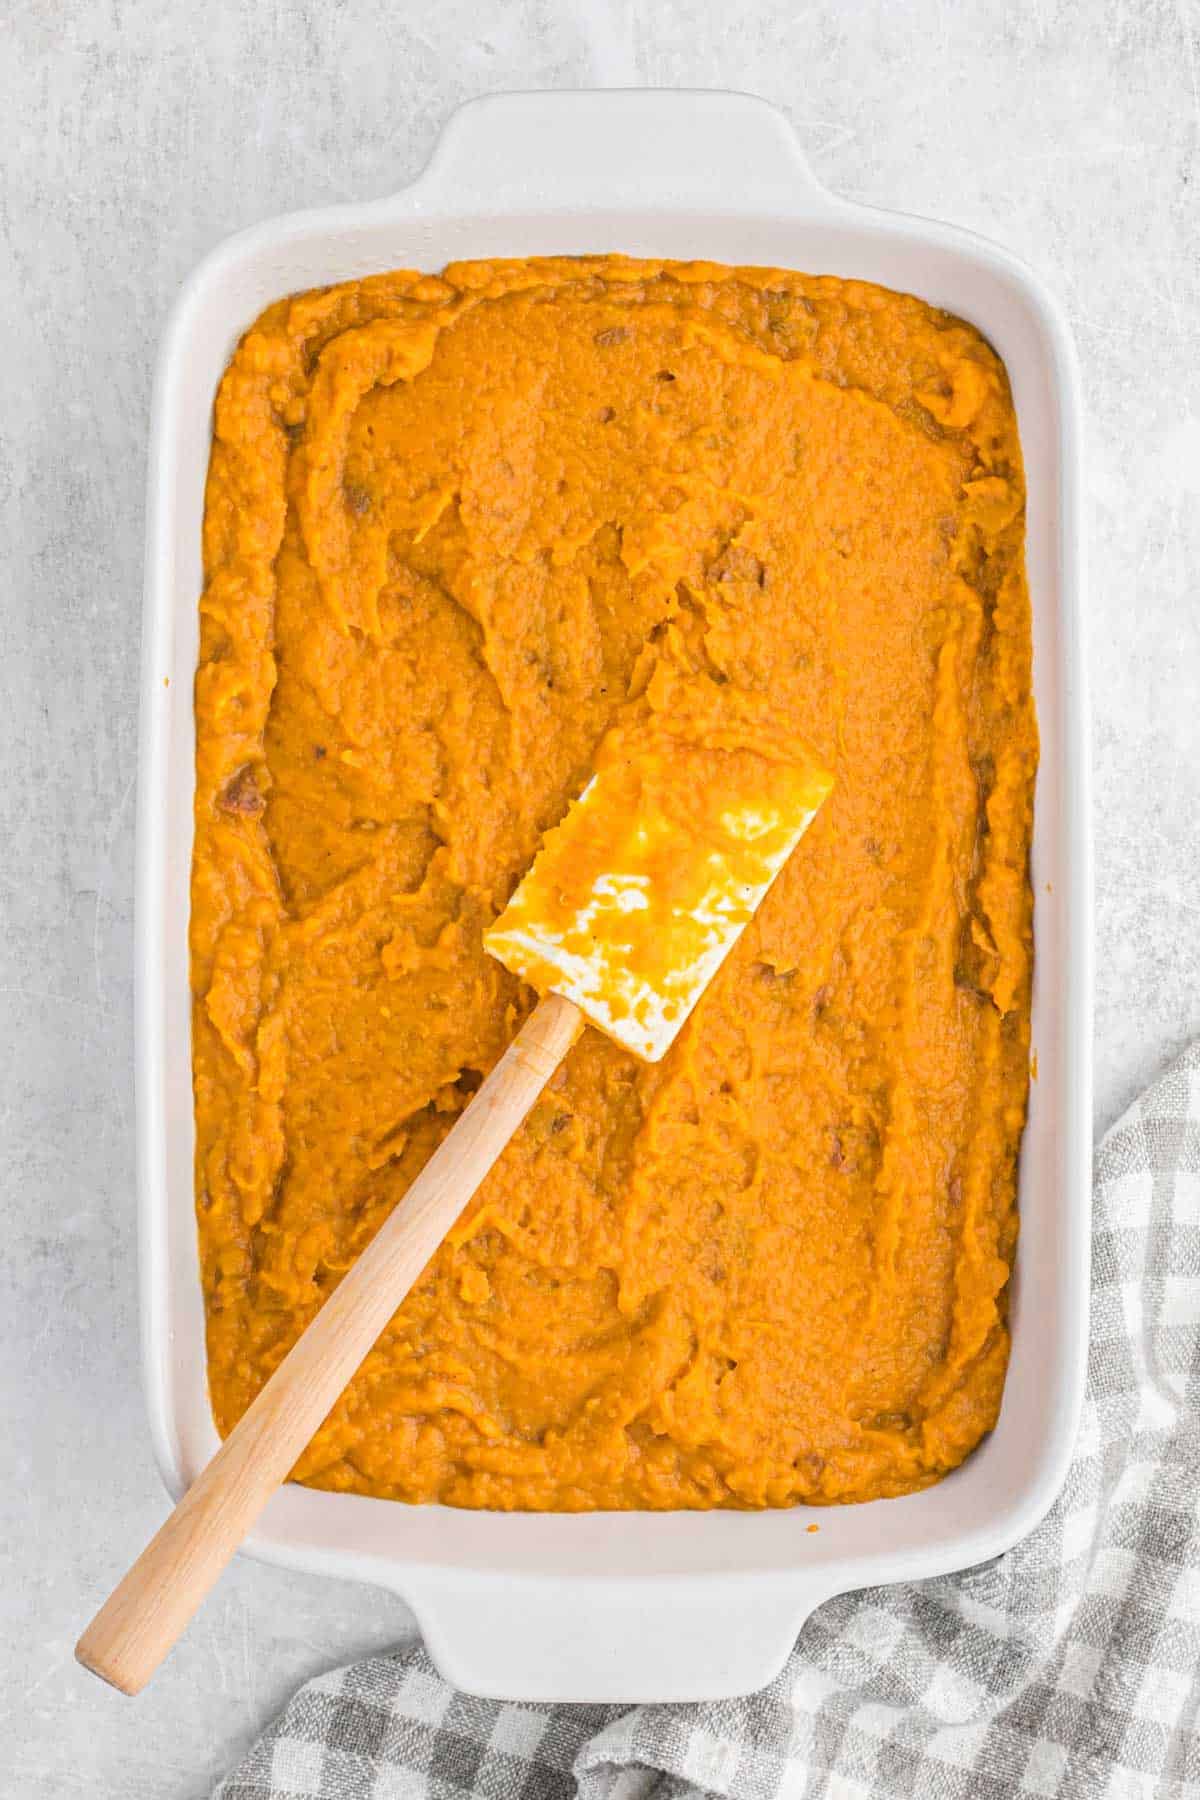 Mashed sweet potatoes spread into the casserole dish.